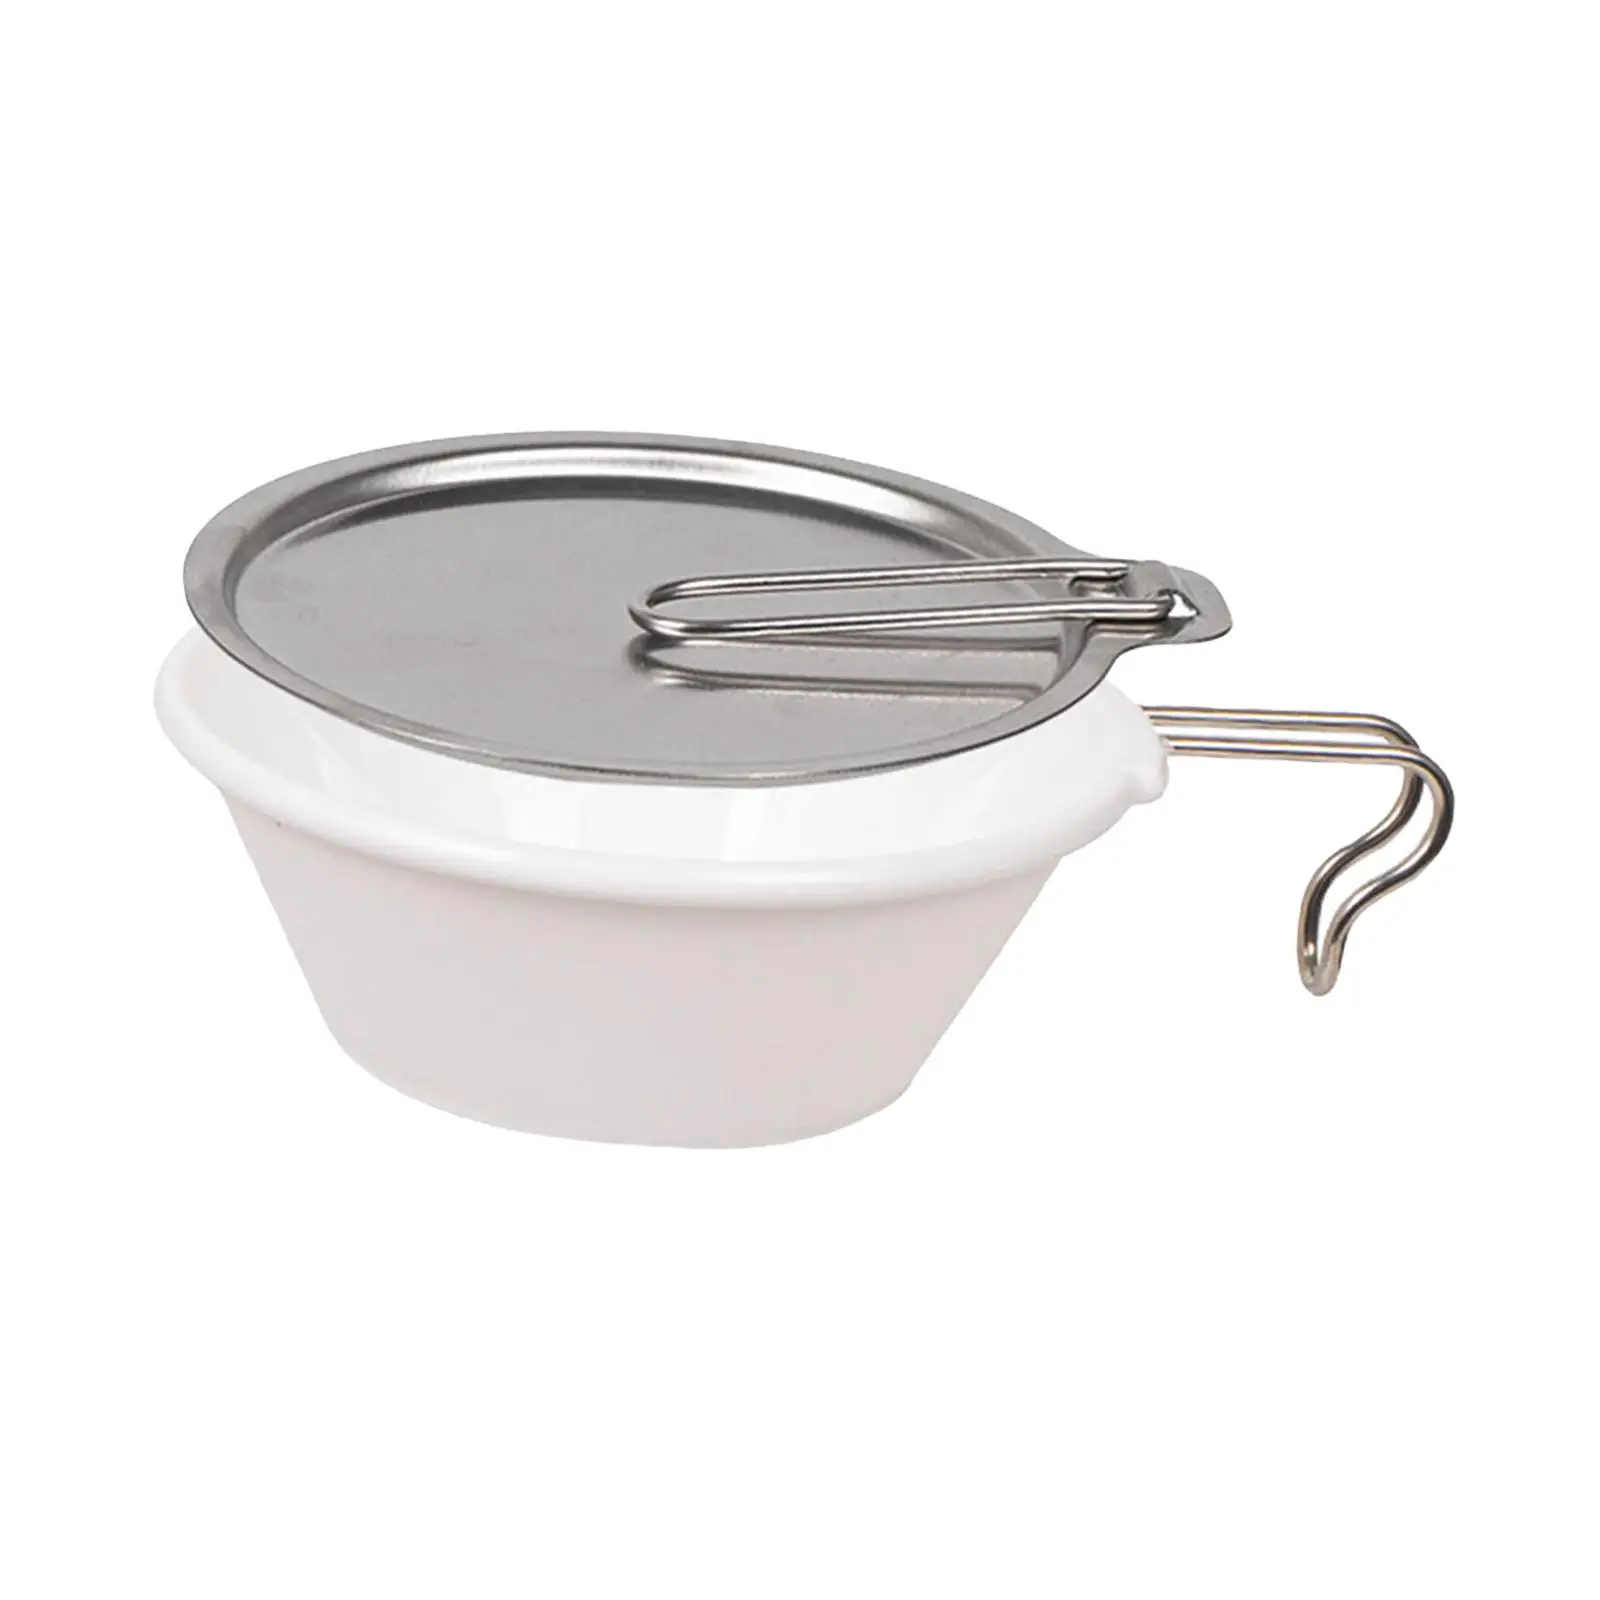 Camping Bowl with Stainless Steel Handle Salad Bowl for Fishing Travel BBQ